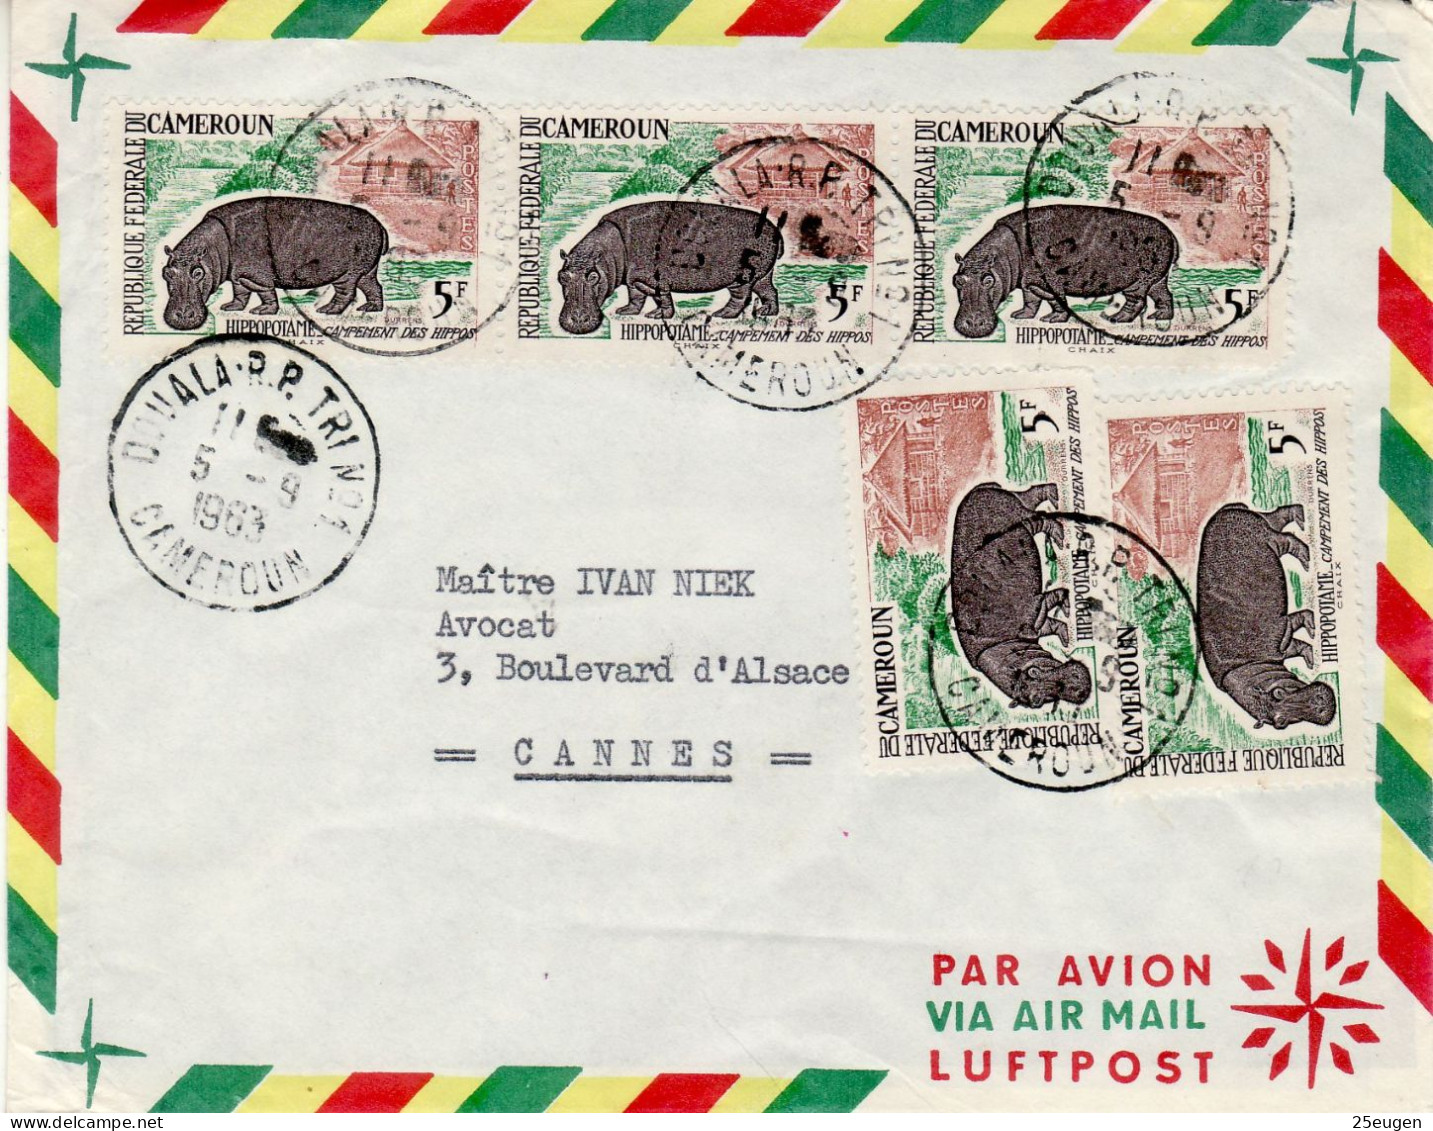 CAMEROON 1963 AIRMAIL LETTER SENT FROM DOUALA TO CANNES - Kamerun (1960-...)